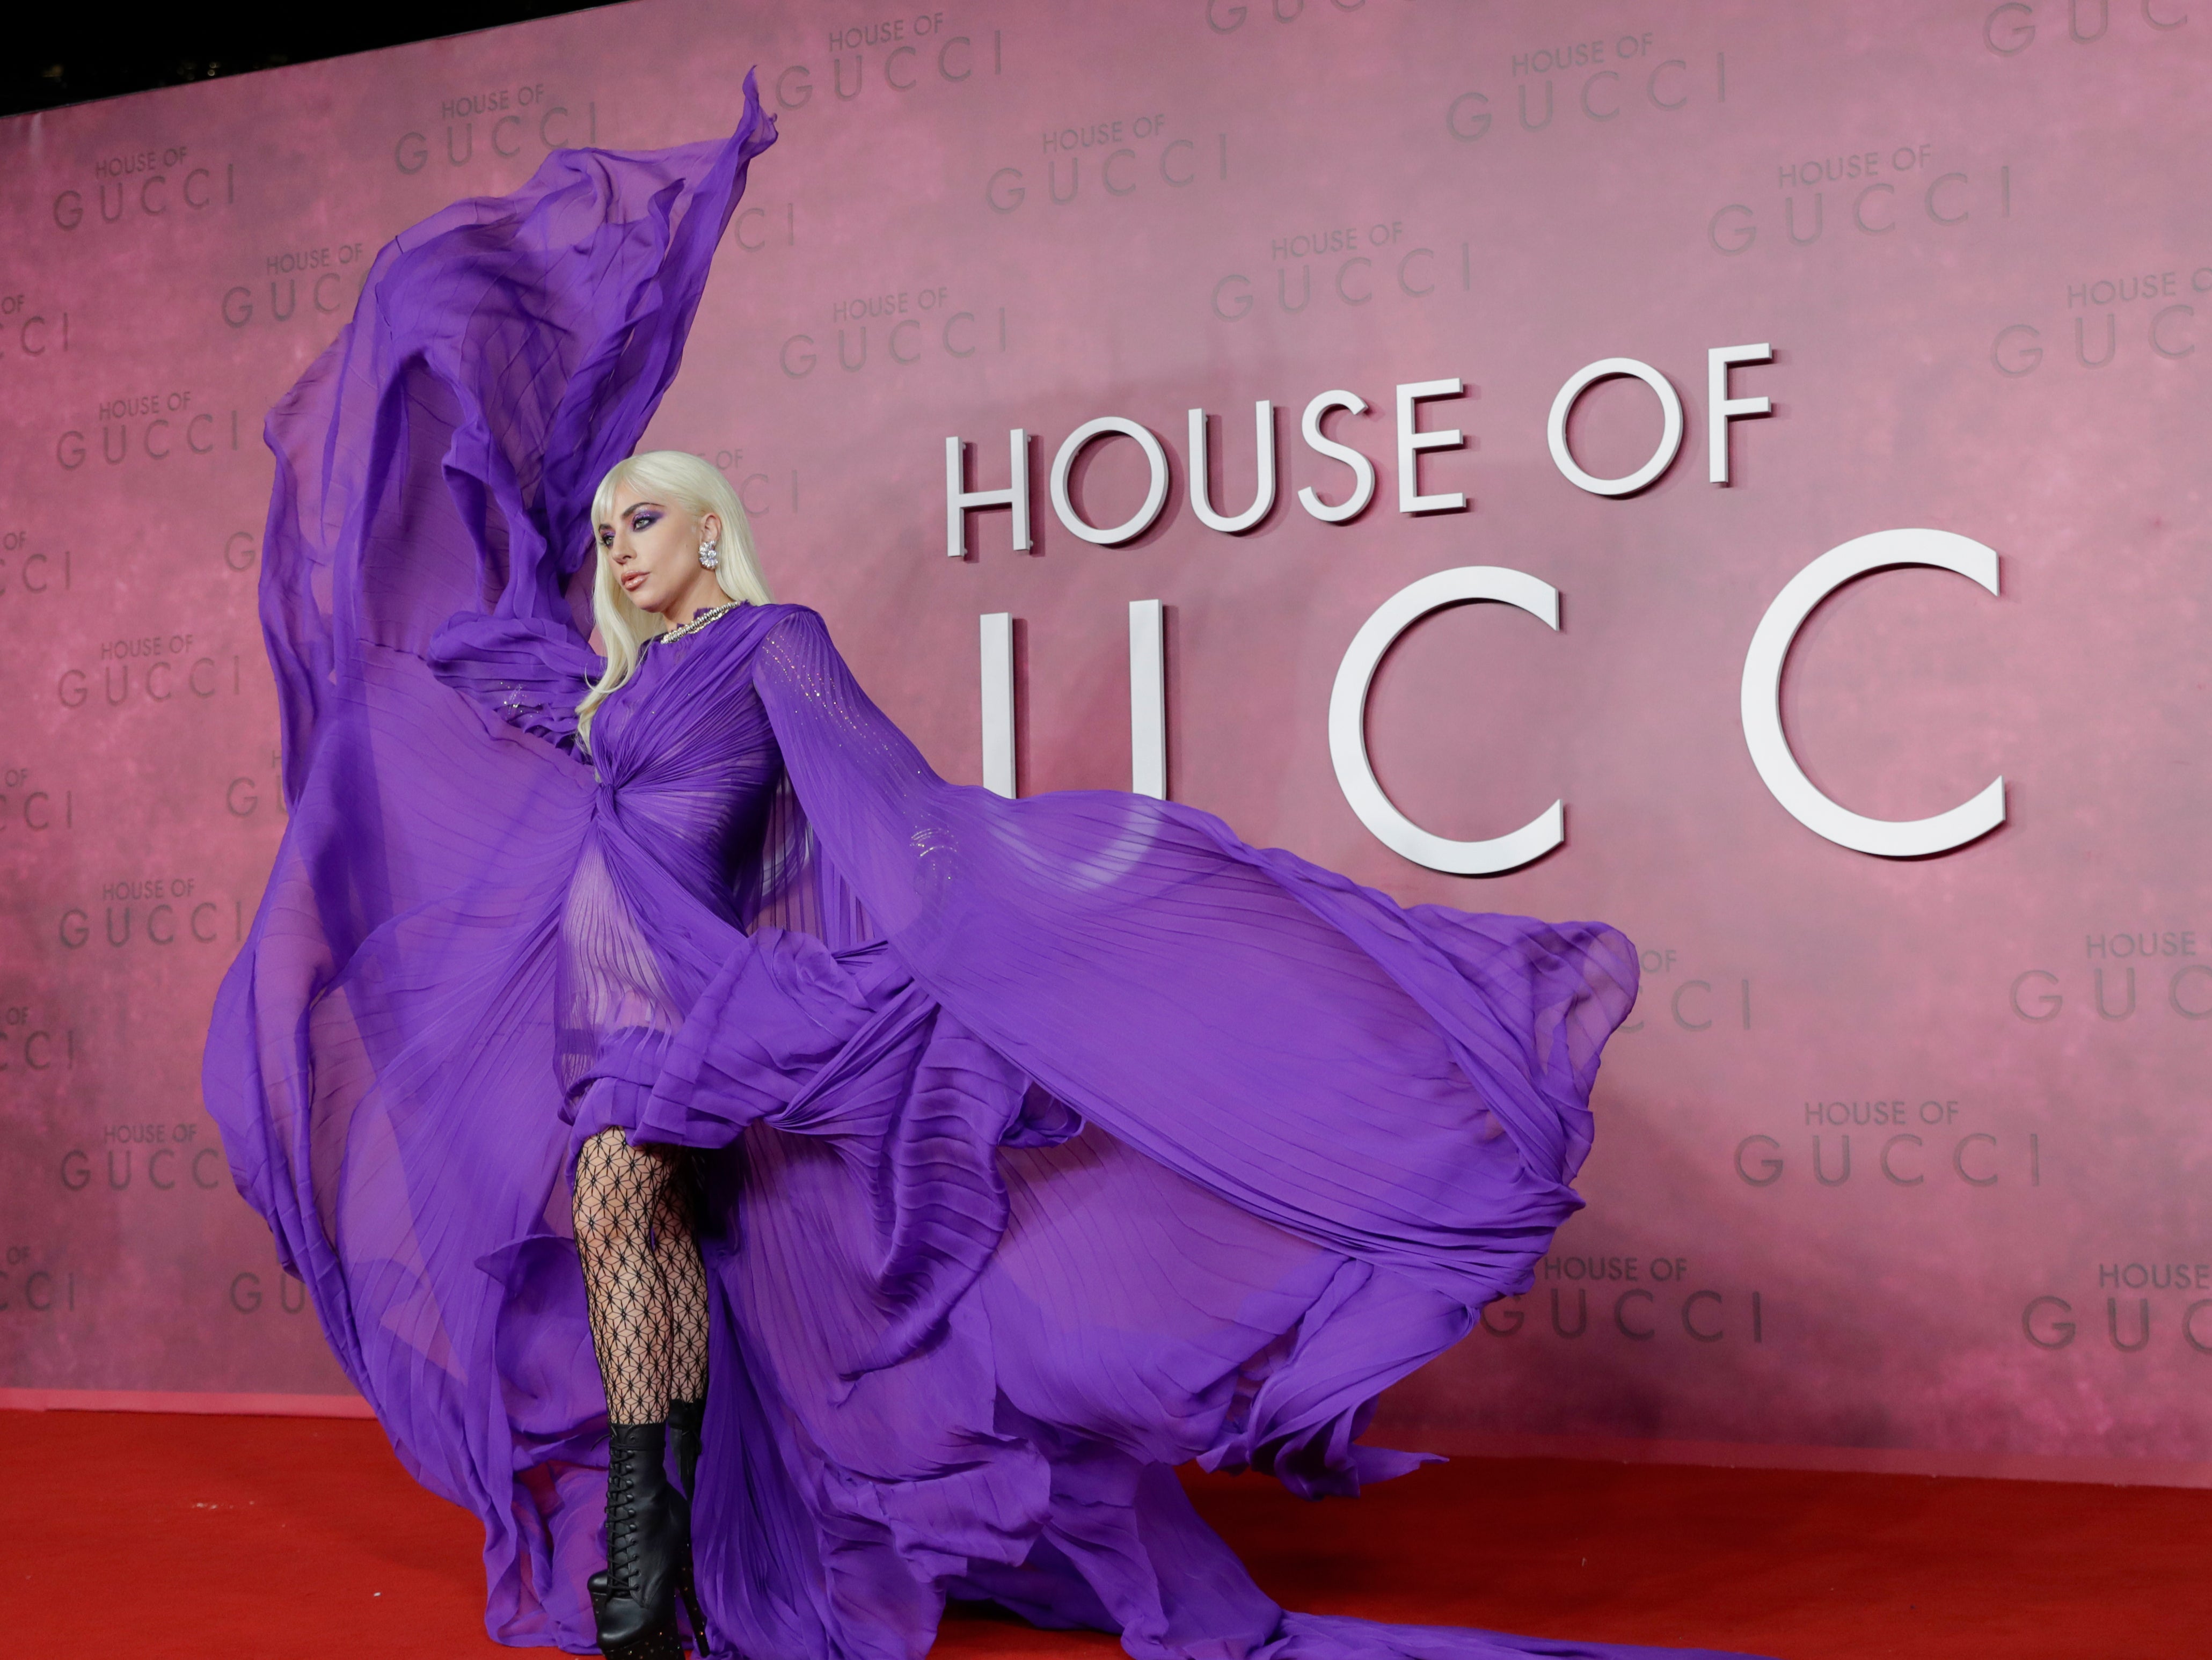 Lady Gaga at the House of Gucci premiere